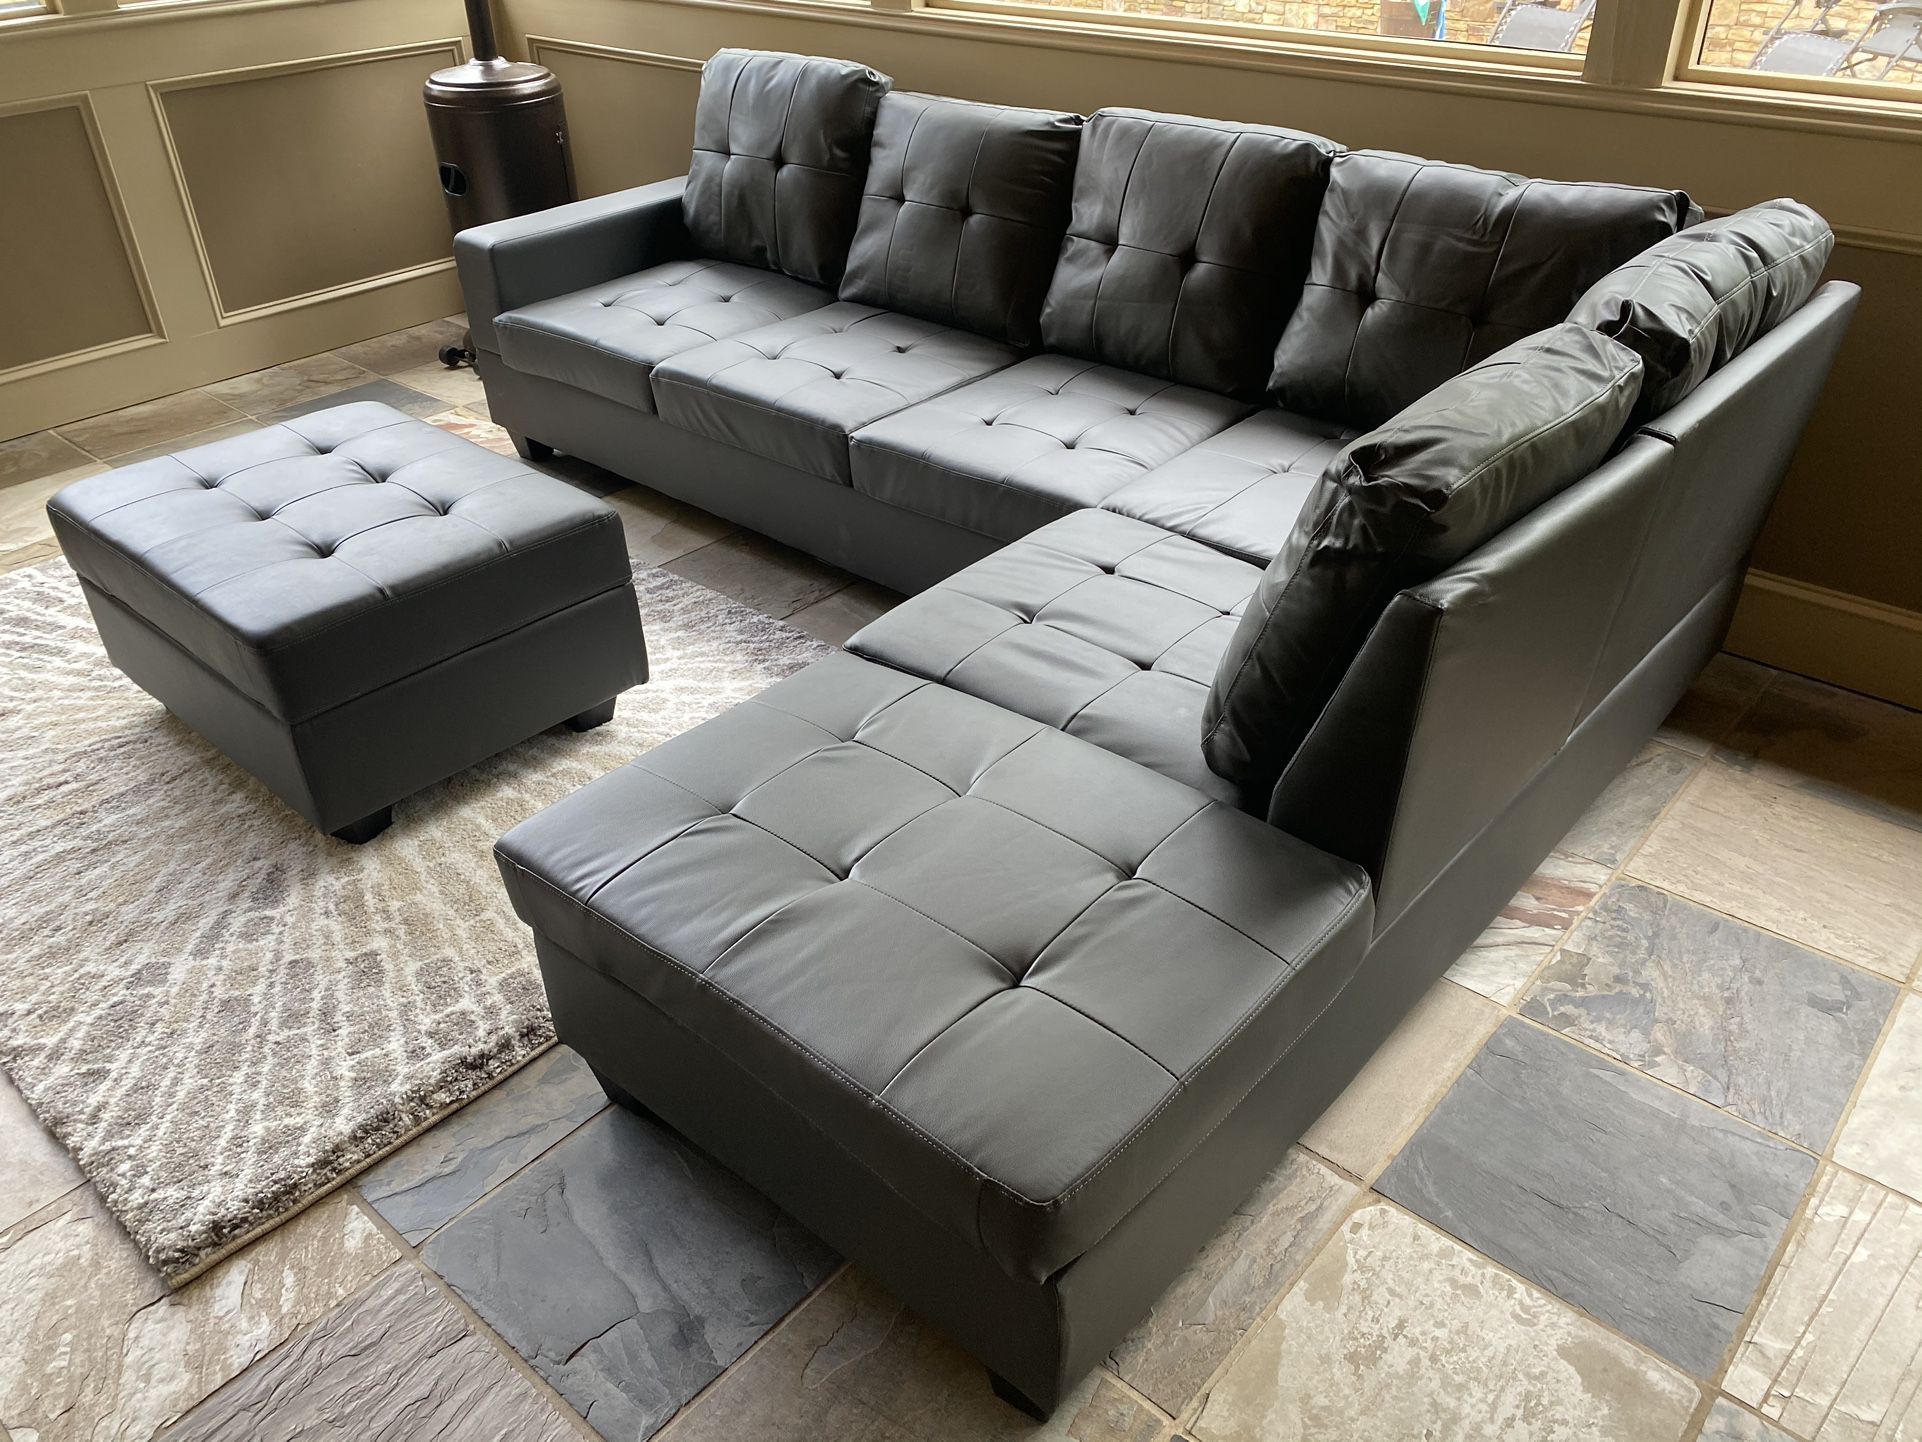 New Charcoal Gray Leather Sectional Sofa Couch With StorageWith Storage Ottoman And Cupholder (reversible Chaise)